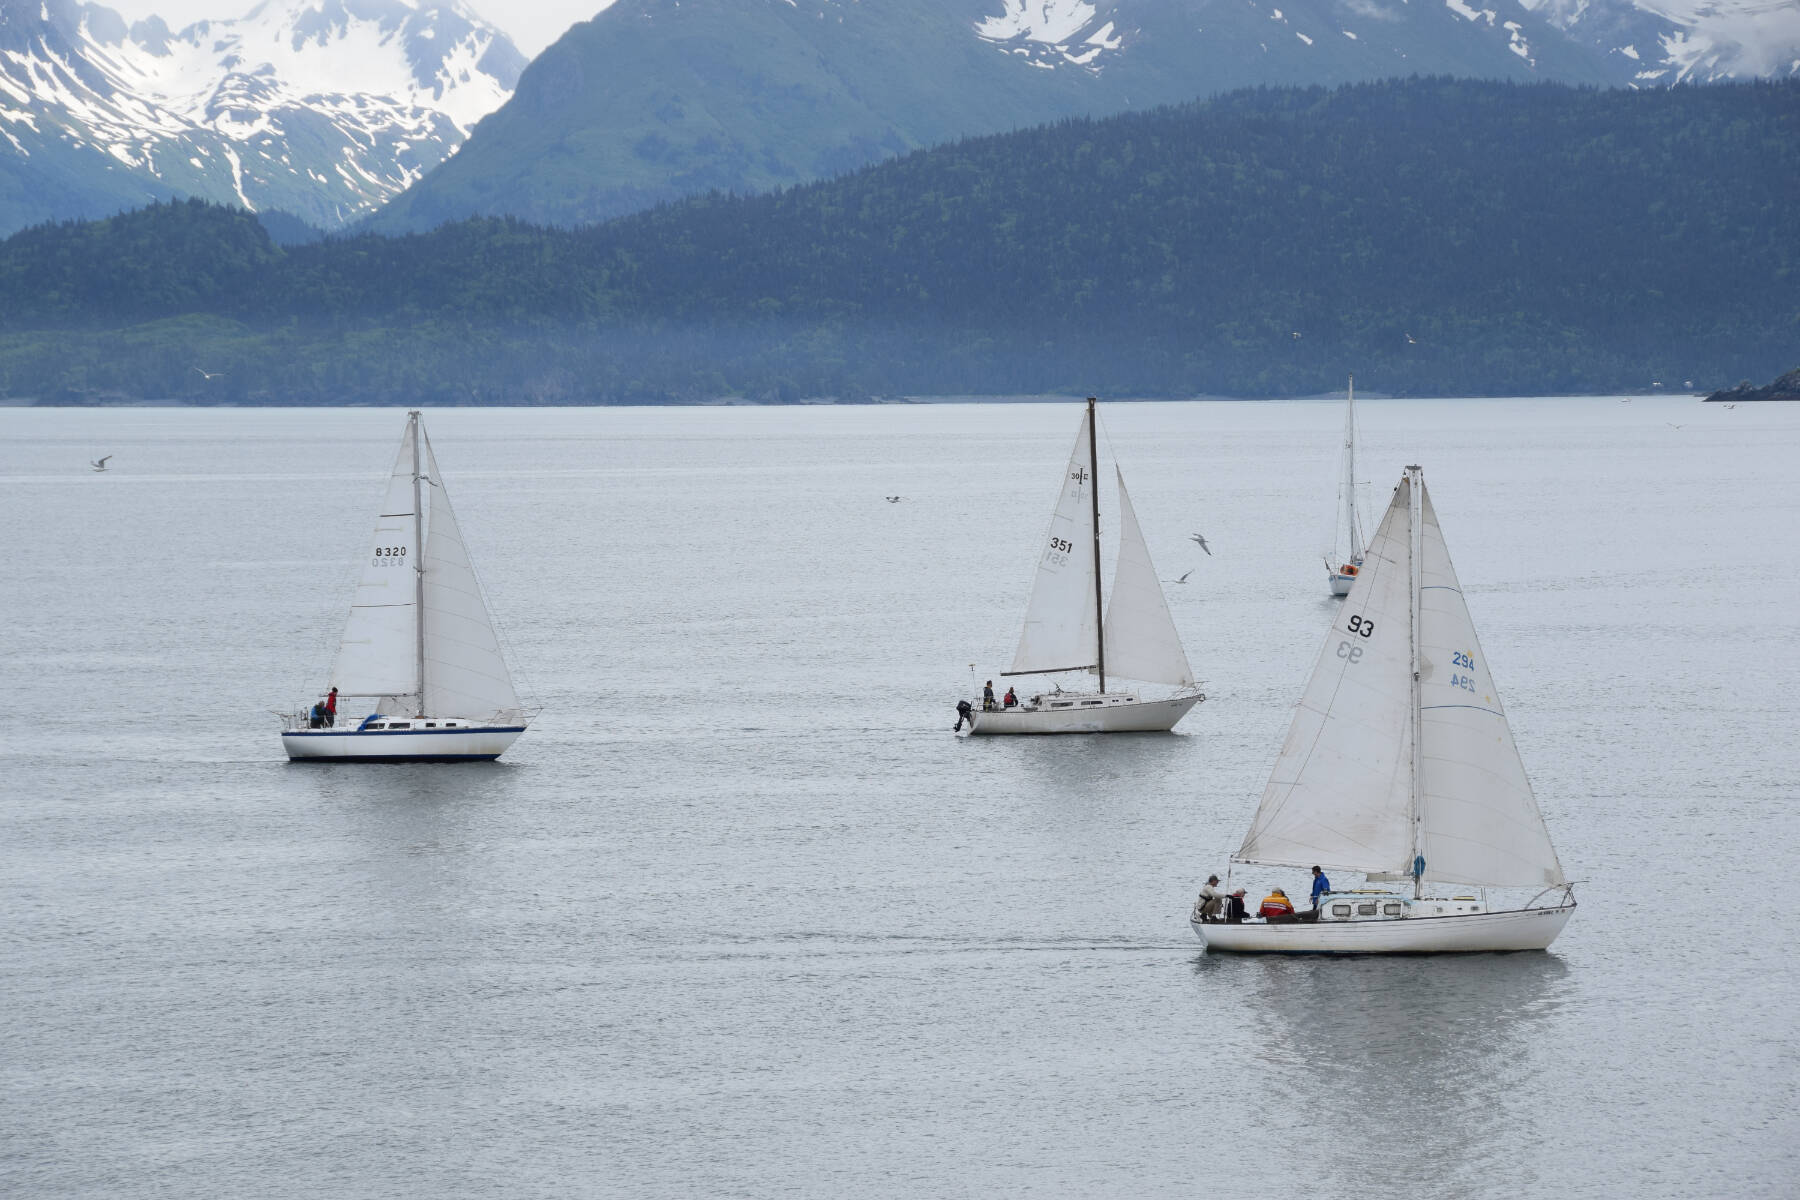 Members of the Homer Yacht Club start the course set for the Homer Yacht Club Regatta on Saturday, June 26, 2023 in the Kachemak Bay below Land’s End Resort in Homer, Alaska. Homer Yacht Club Commodore Craig Forrest is on number 93, the Arctica. (Delcenia Cosman/Homer News)